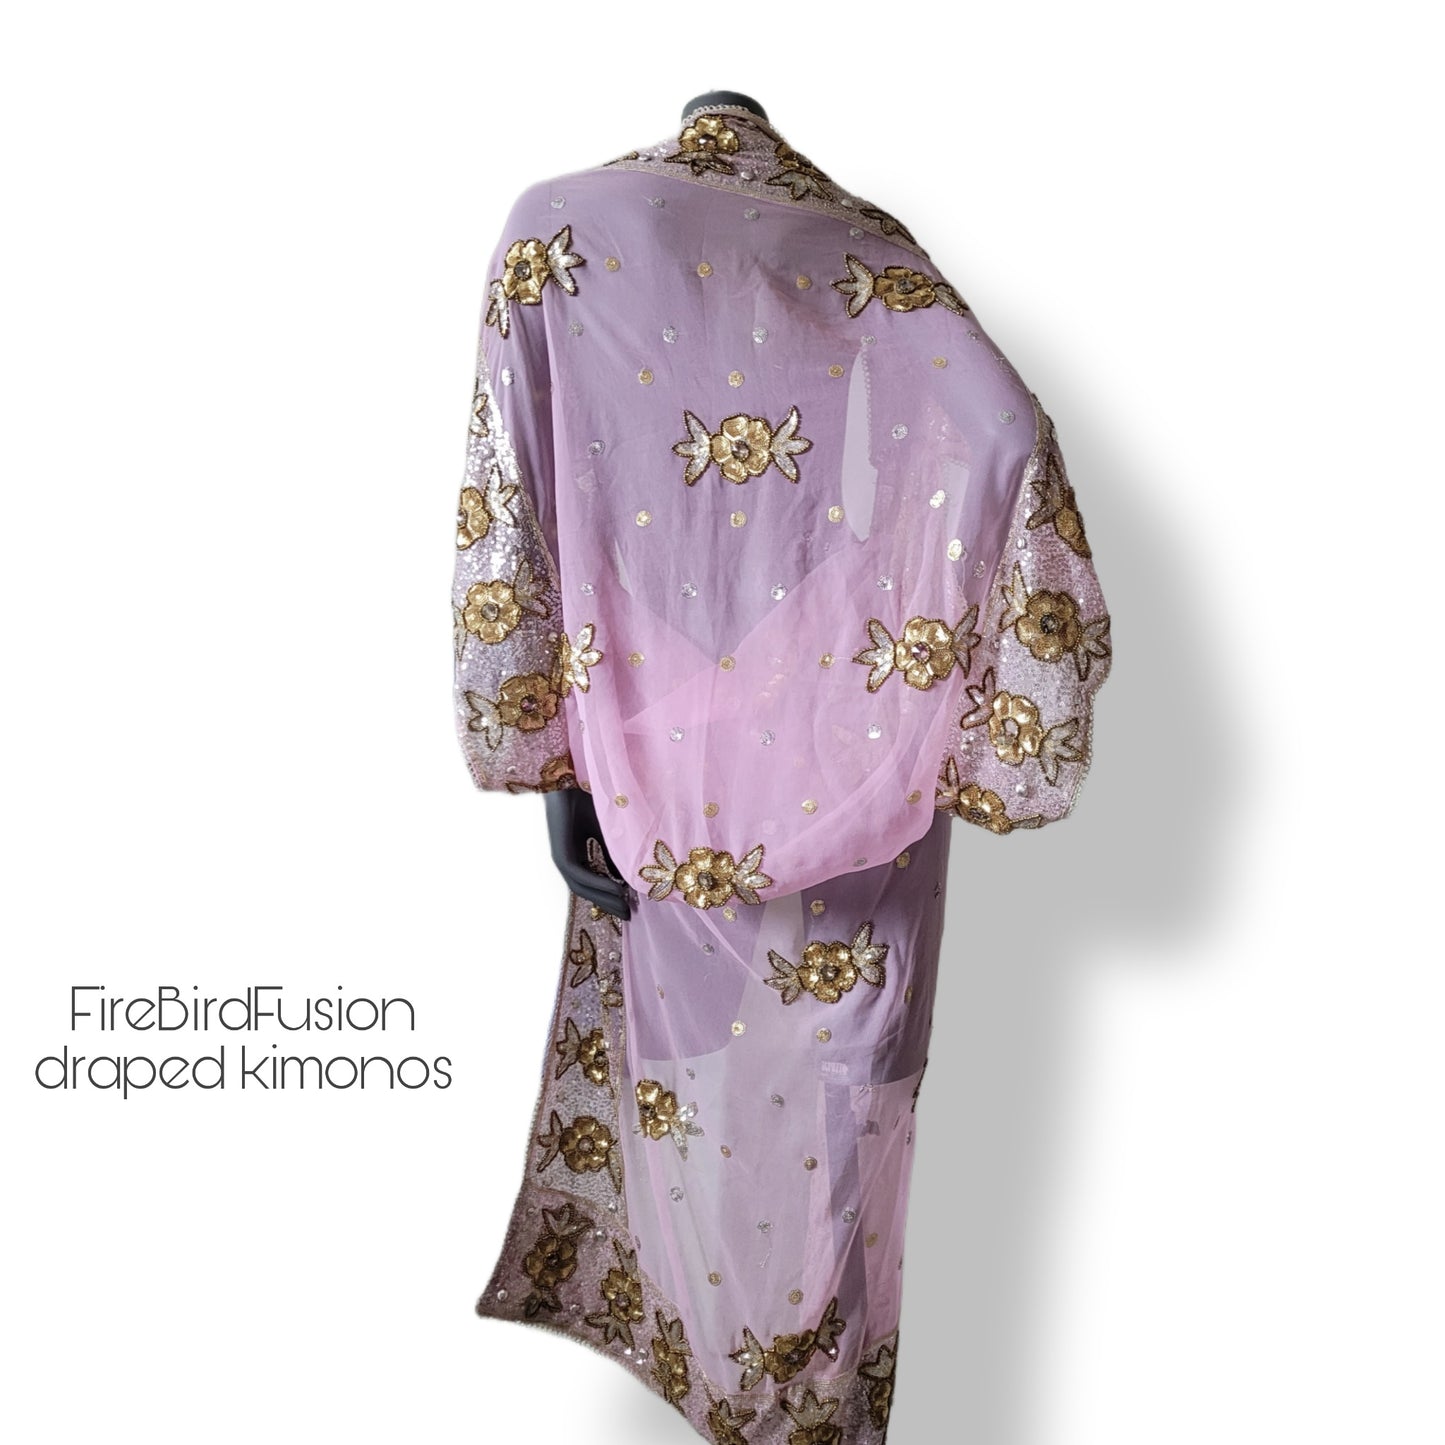 Draped kimono in cool pale pink with elaborated hand embrodery in silver, golden sequins, bronze beads and glass crystals shifting in pink & green (S)